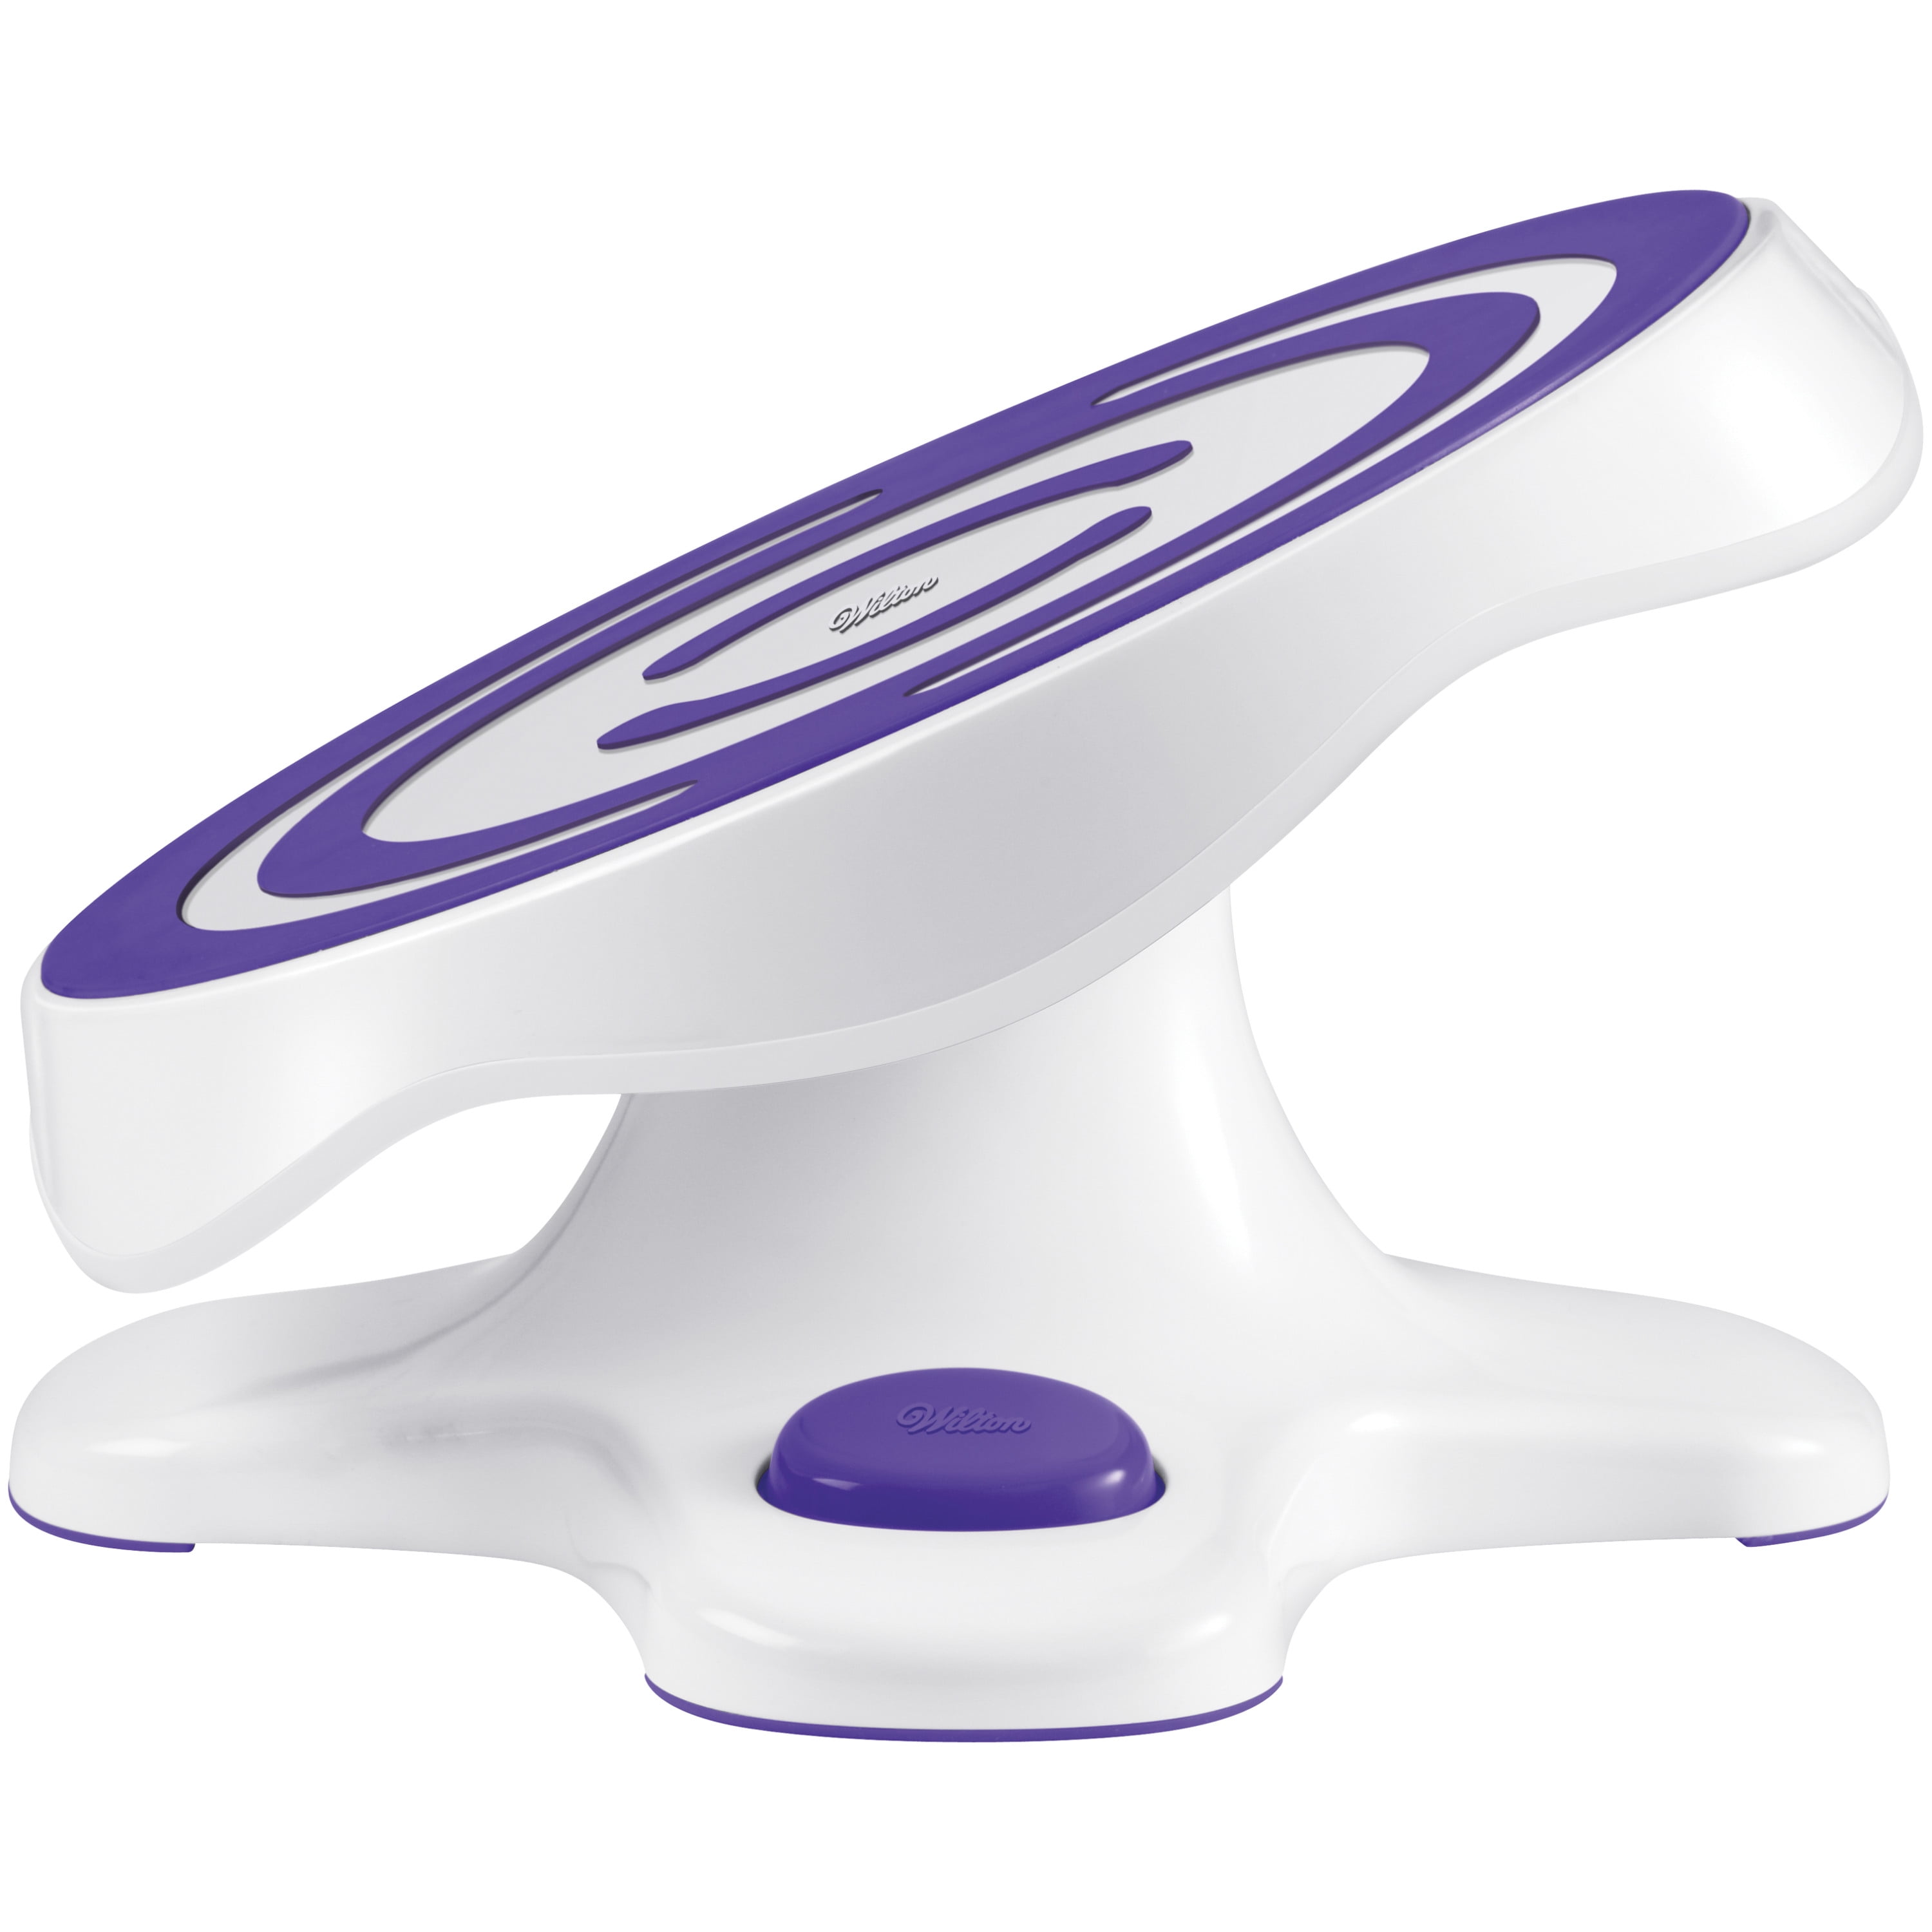 Witon Cake Turntable Stand, High and Low Spinning, 12.7 inch - Wilton